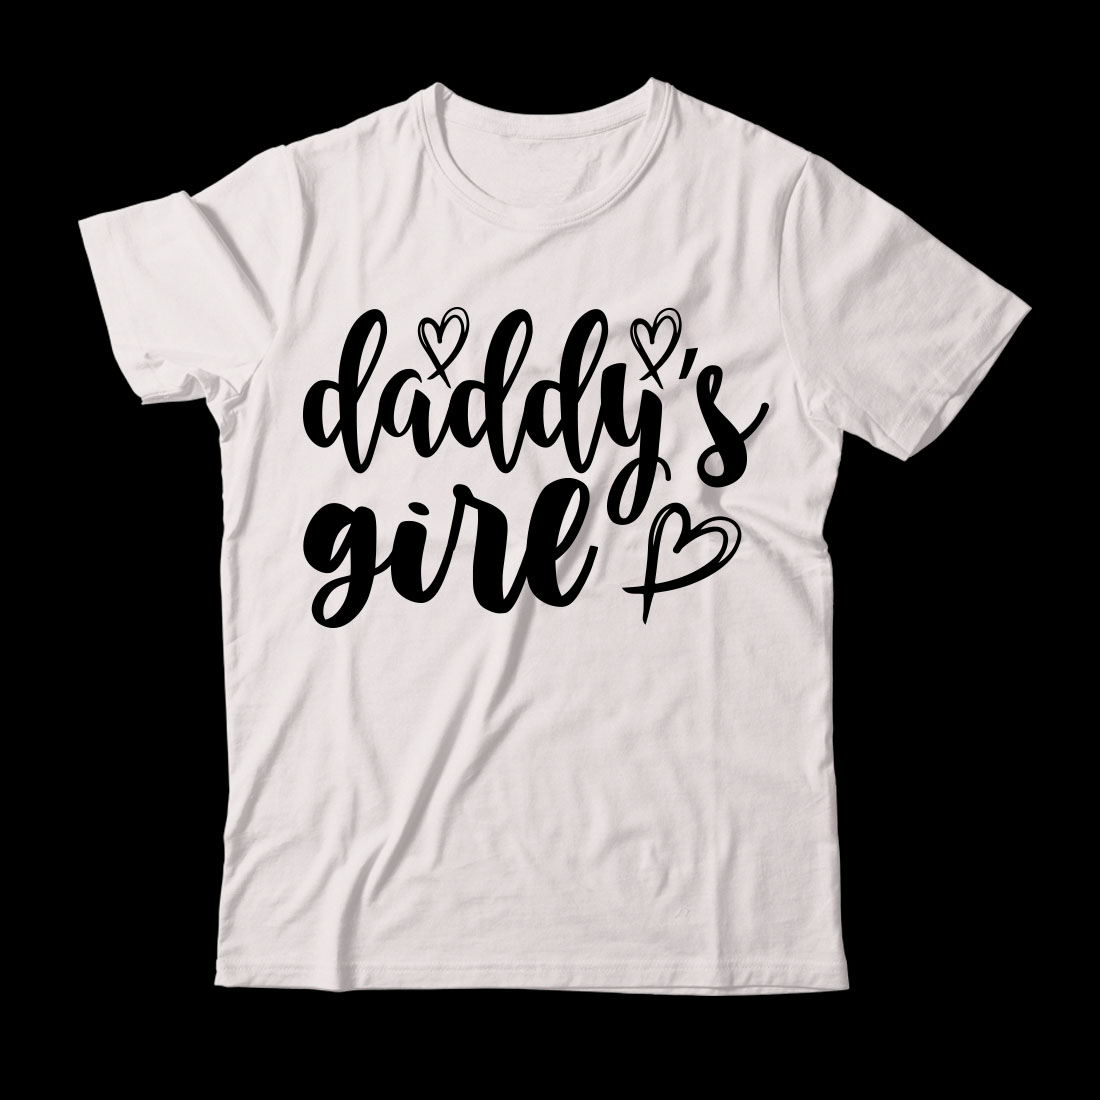 White t - shirt that says daddy's girl.